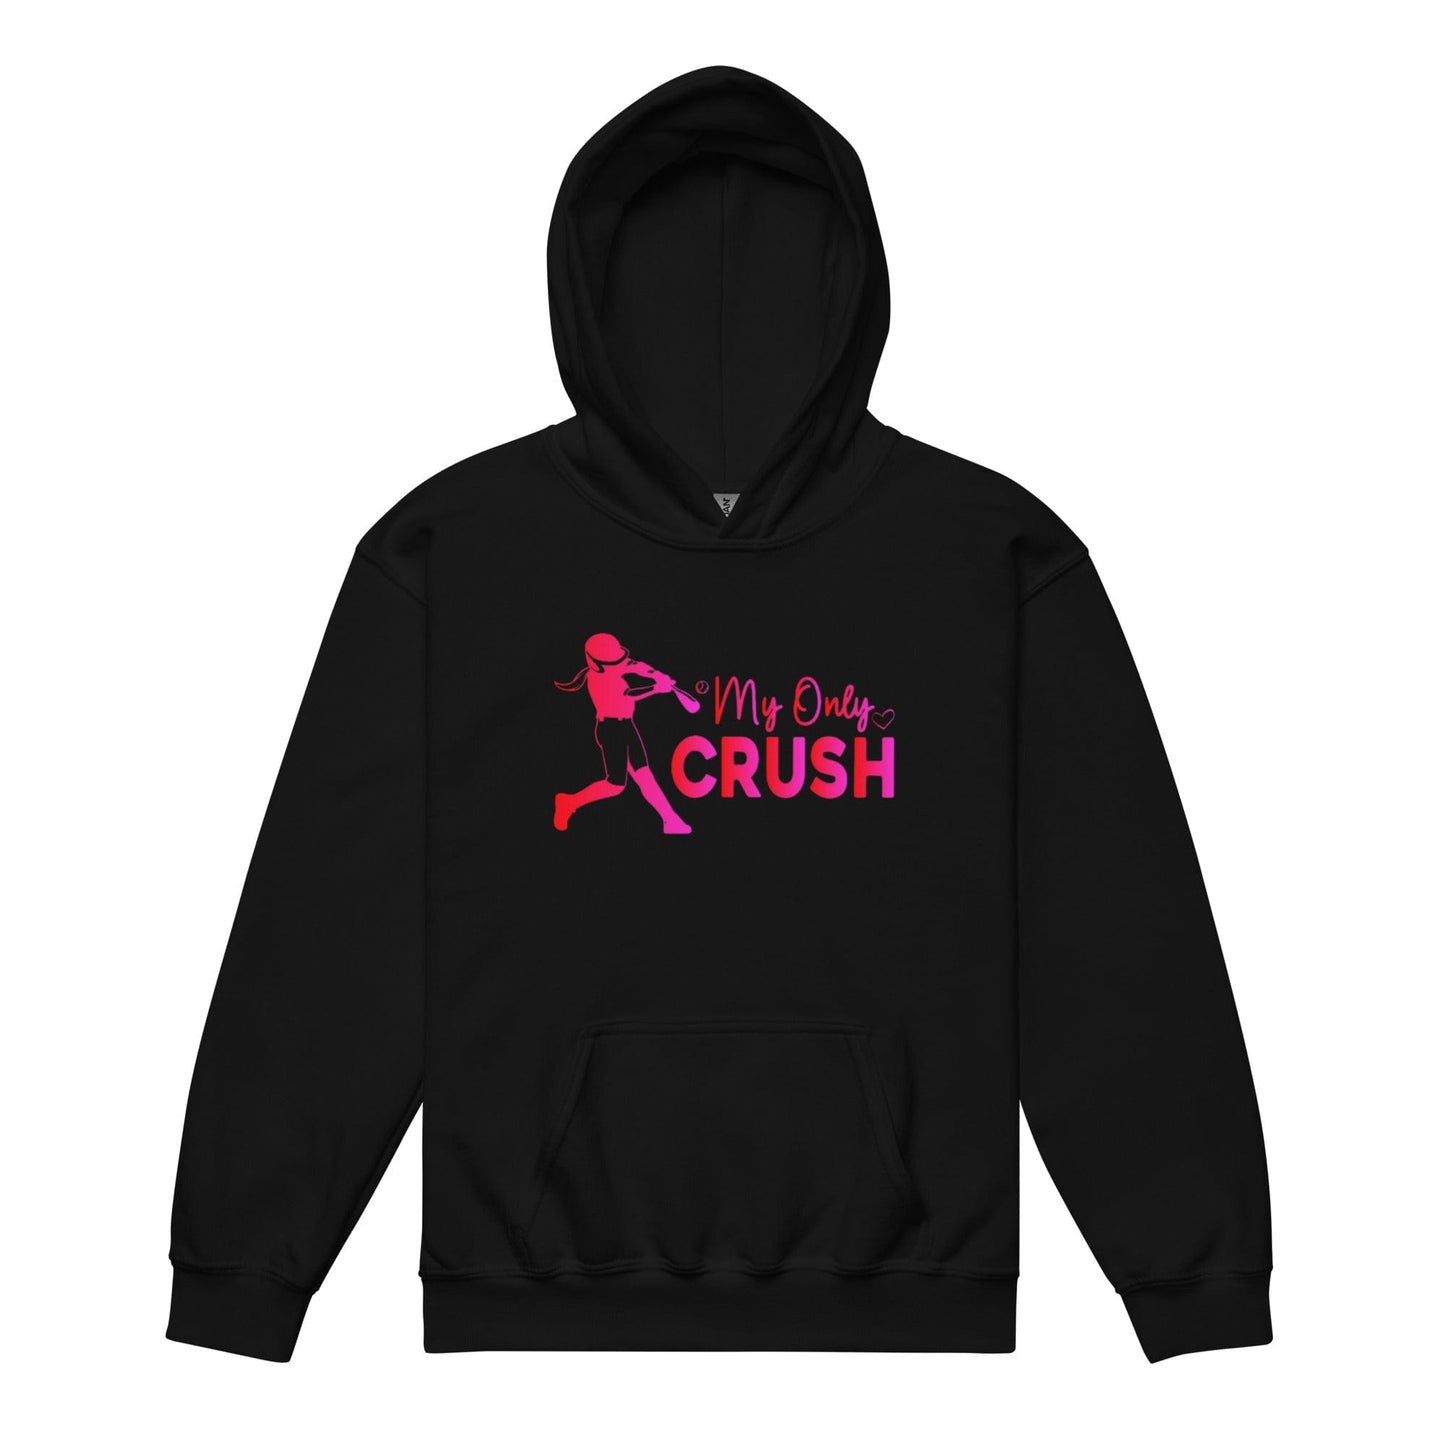 My Only Crush - Youth Hoodie